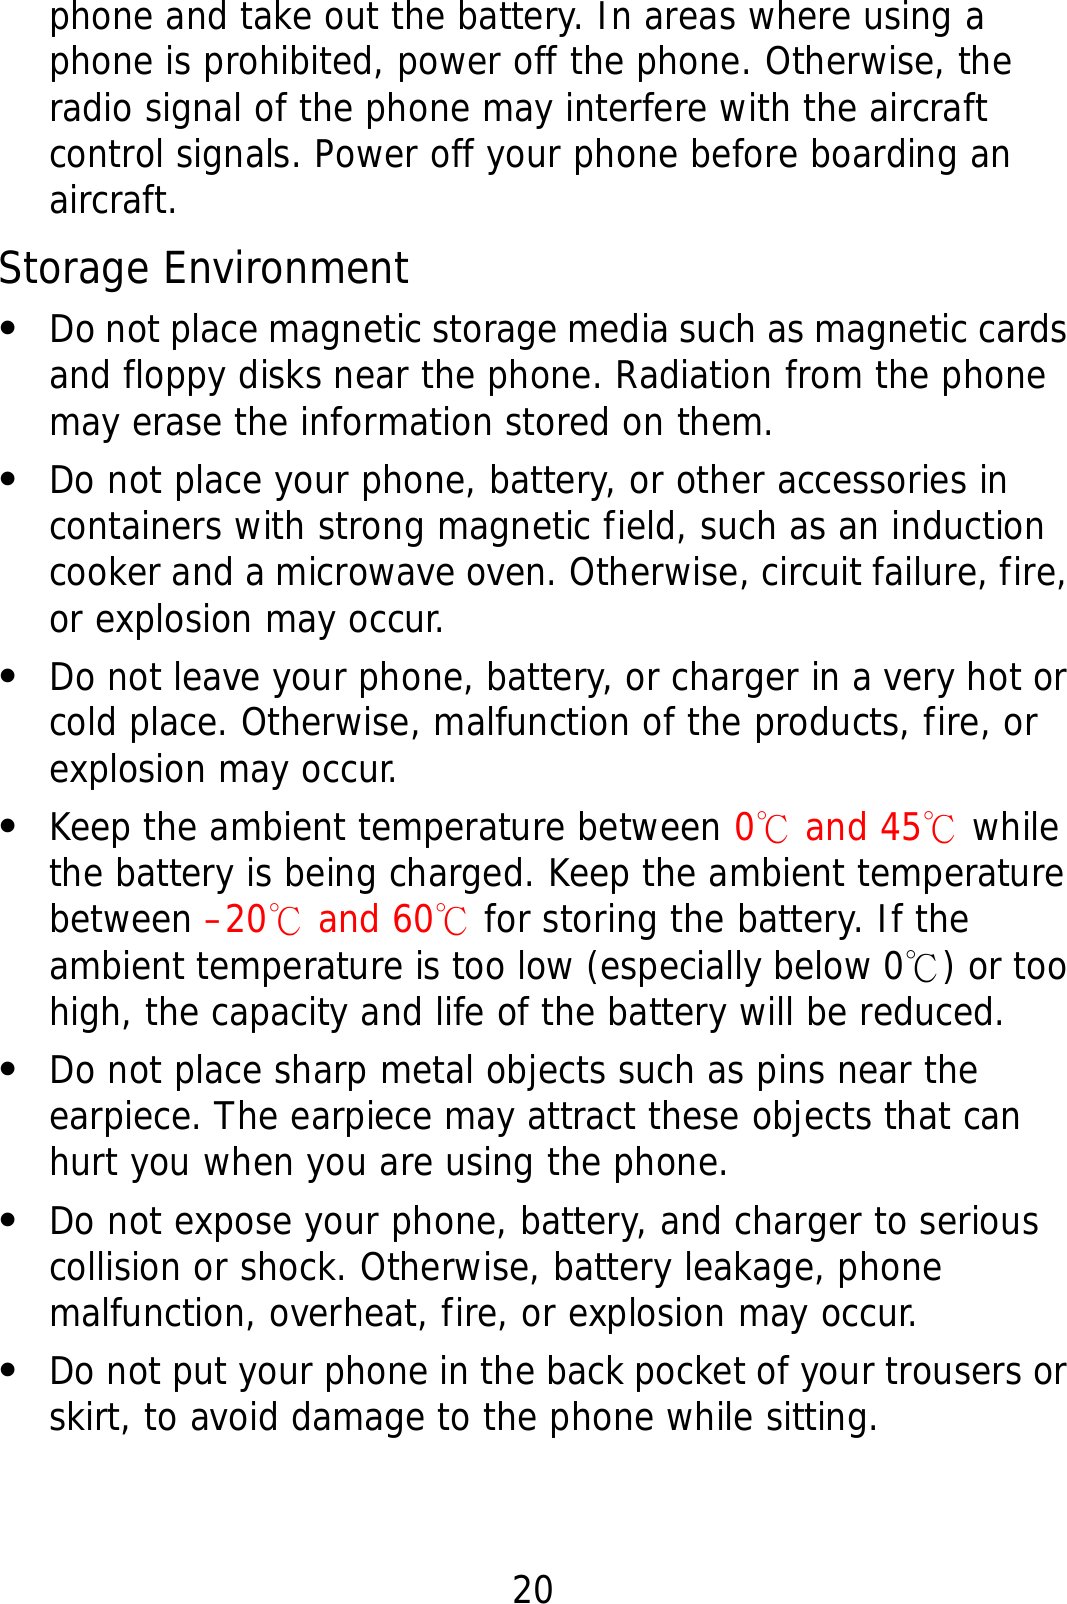 20 phone and take out the battery. In areas where using a phone is prohibited, power off the phone. Otherwise, the radio signal of the phone may interfere with the aircraft control signals. Power off your phone before boarding an aircraft. Storage Environment z Do not place magnetic storage media such as magnetic cards and floppy disks near the phone. Radiation from the phone may erase the information stored on them. z Do not place your phone, battery, or other accessories in containers with strong magnetic field, such as an induction cooker and a microwave oven. Otherwise, circuit failure, fire, or explosion may occur. z Do not leave your phone, battery, or charger in a very hot or cold place. Otherwise, malfunction of the products, fire, or explosion may occur. z Keep the ambient temperature between 0℃ and 45℃ while the battery is being charged. Keep the ambient temperature between –20  and 60℃℃ for storing the battery. If the ambient temperature is too low (especially below 0 ) or too ℃high, the capacity and life of the battery will be reduced. z Do not place sharp metal objects such as pins near the earpiece. The earpiece may attract these objects that can hurt you when you are using the phone. z Do not expose your phone, battery, and charger to serious collision or shock. Otherwise, battery leakage, phone malfunction, overheat, fire, or explosion may occur. z Do not put your phone in the back pocket of your trousers or skirt, to avoid damage to the phone while sitting. 